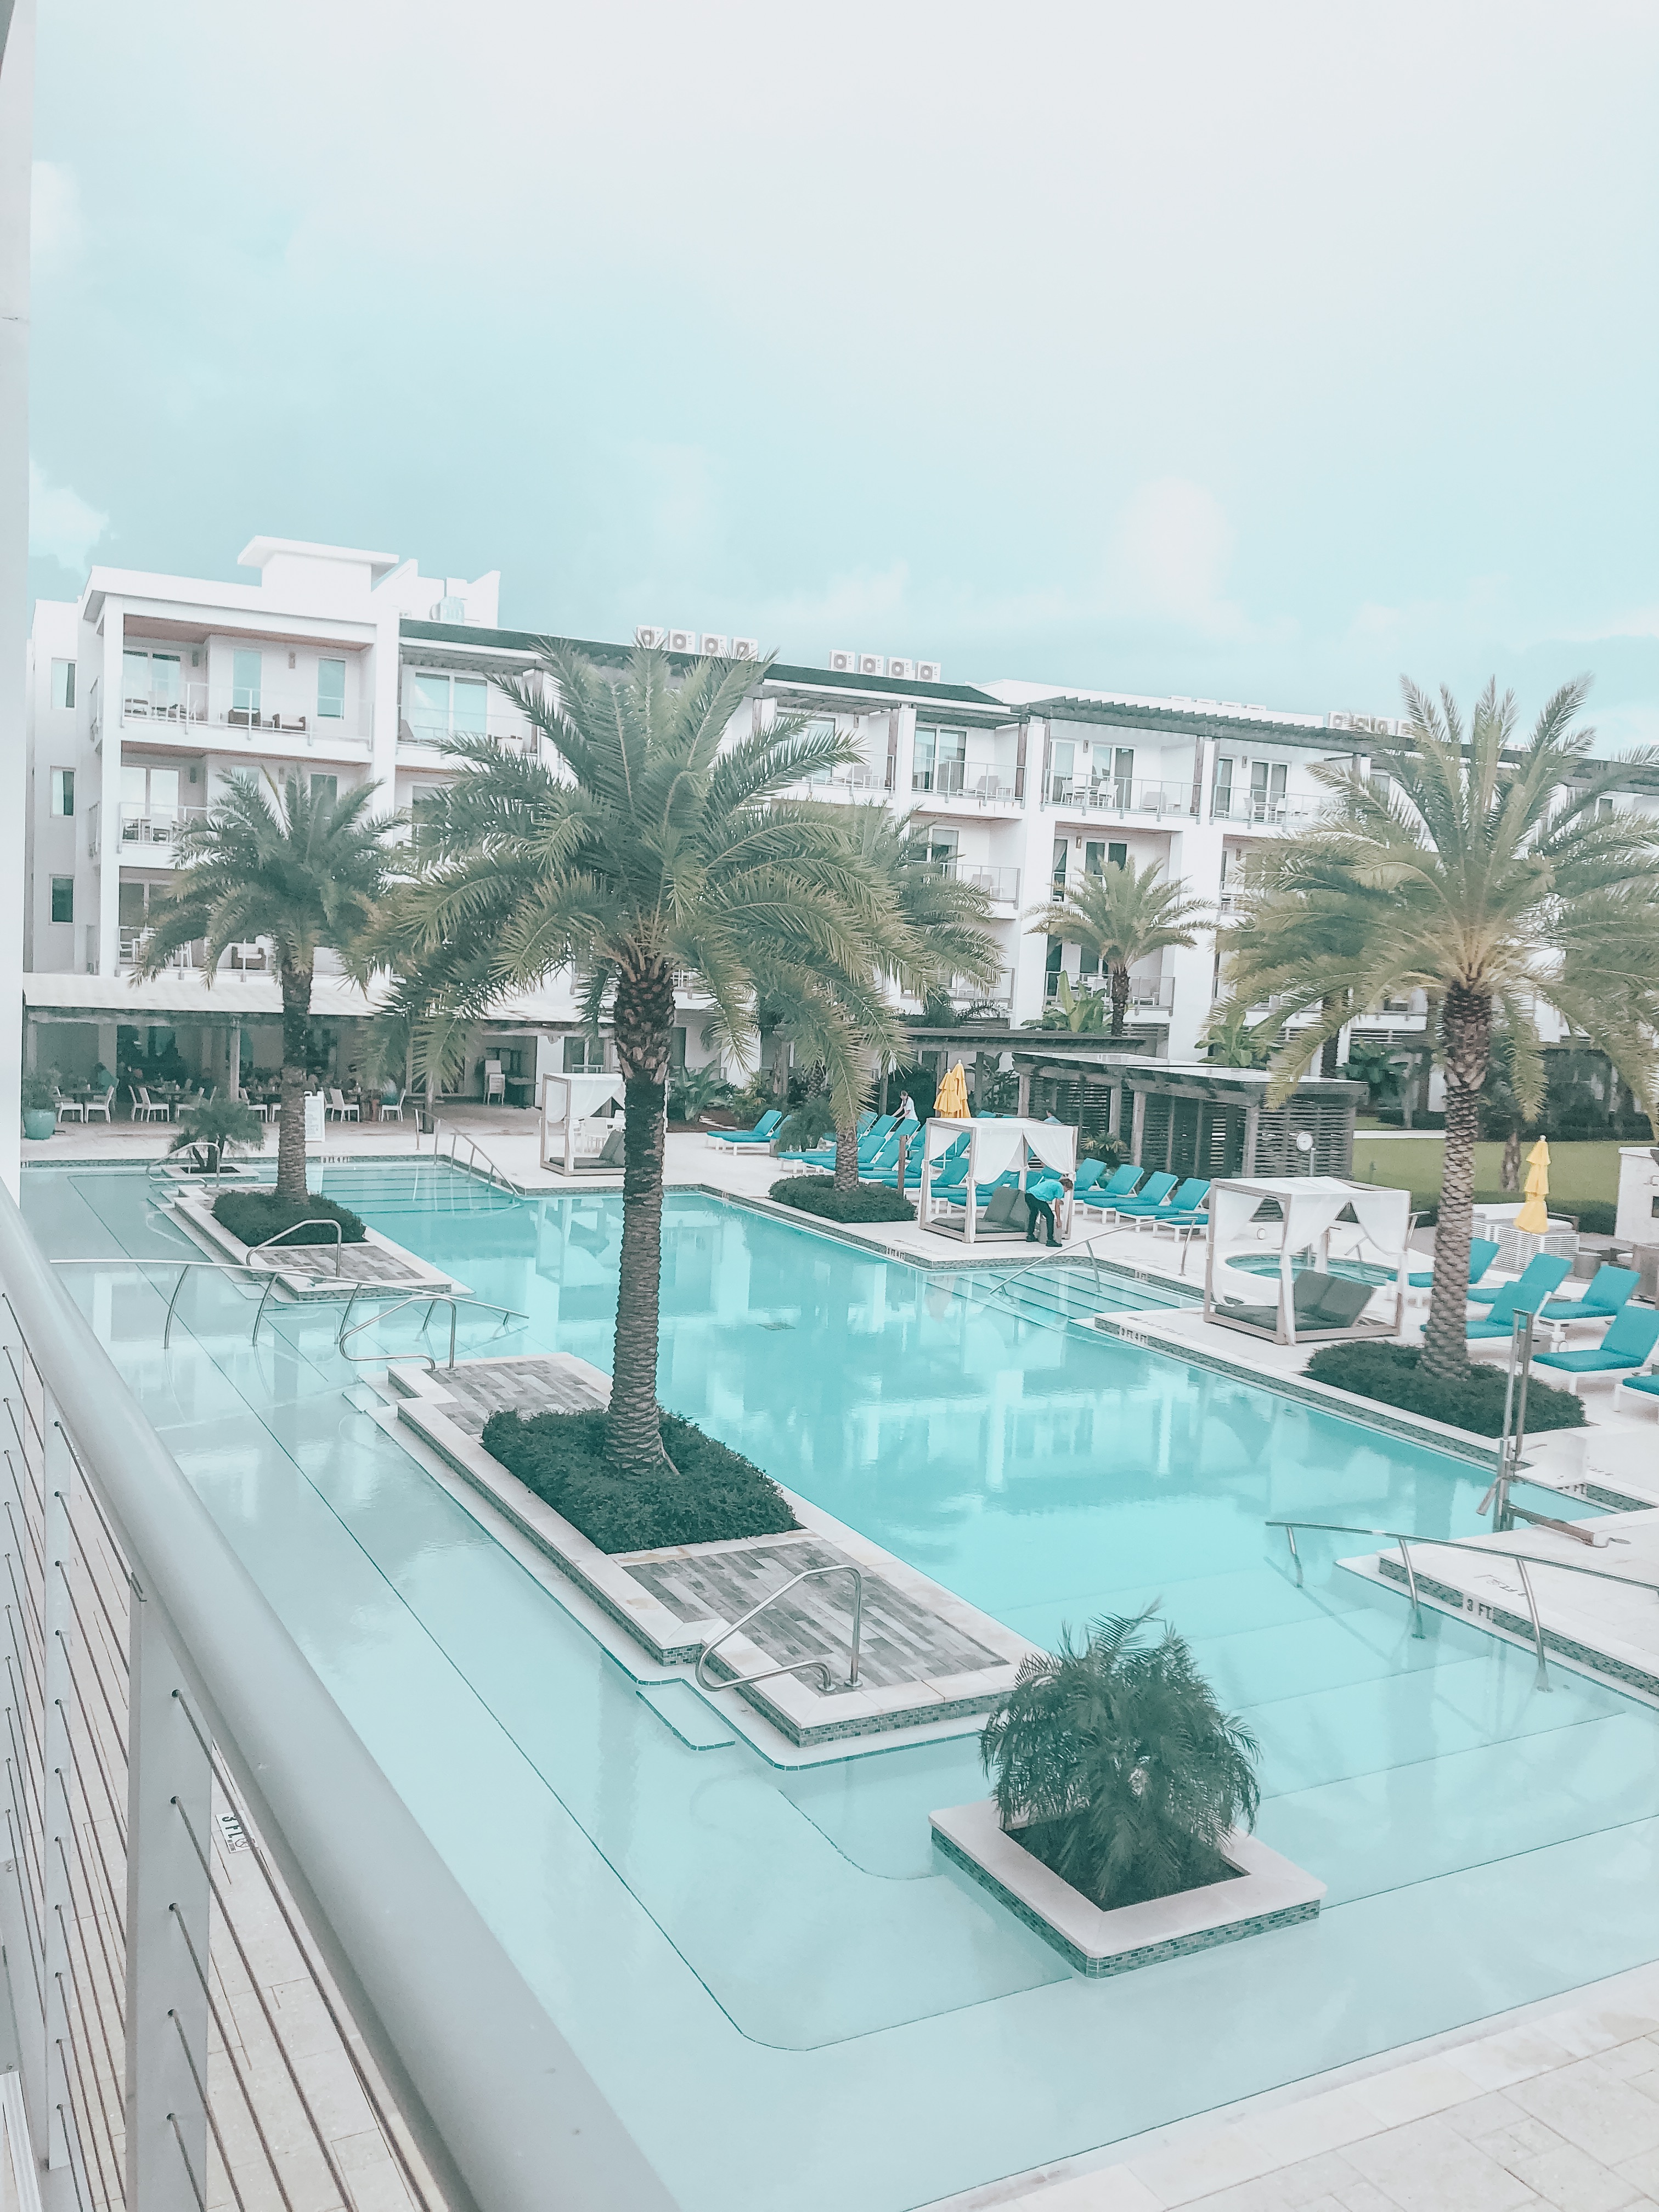 30A Blogger Weekend - The Pointe Pool